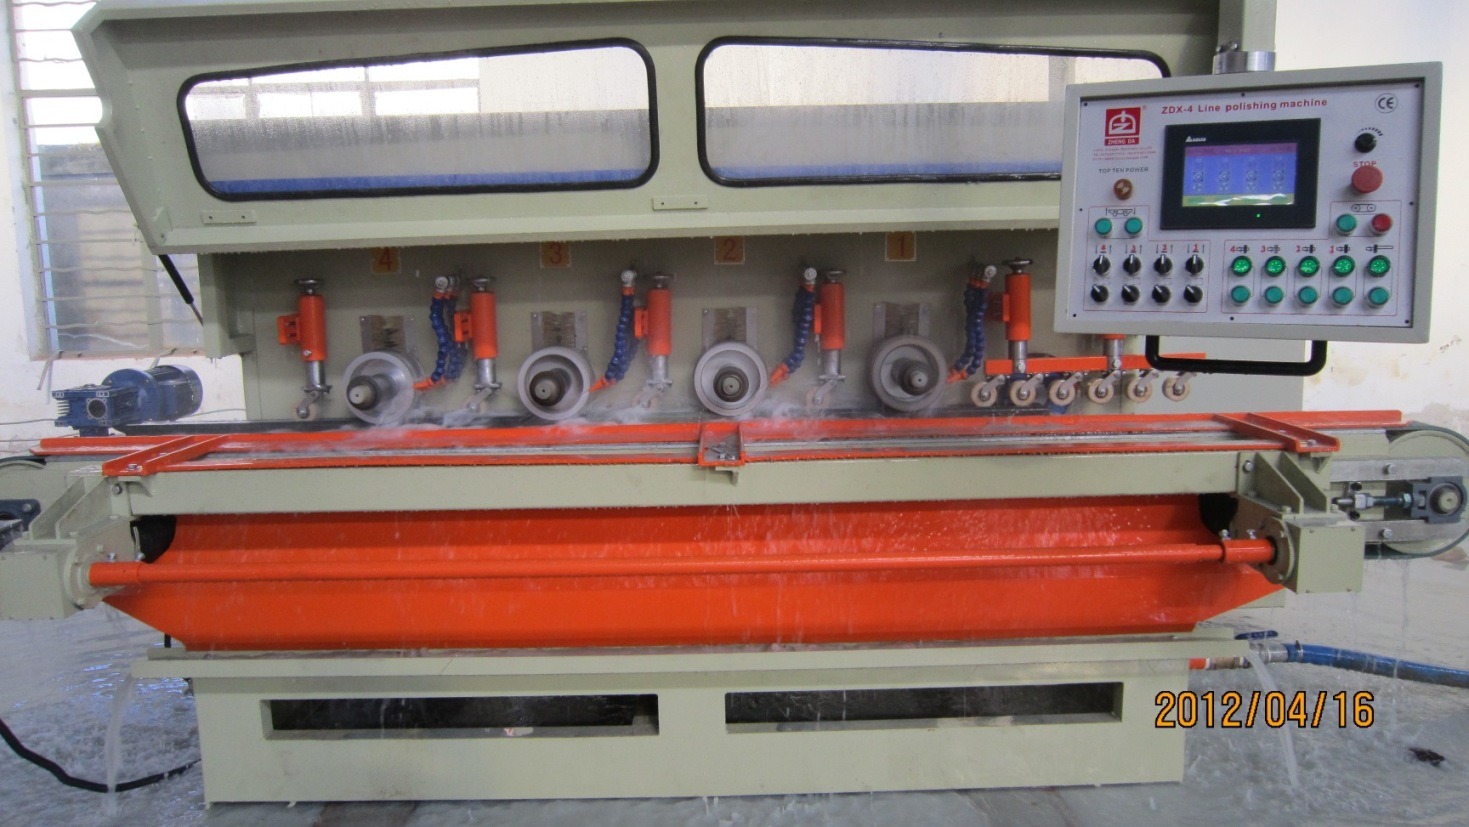 Fully Automatic Line Grinding and Polishing Machine with 4 Heads (ZDX-4)